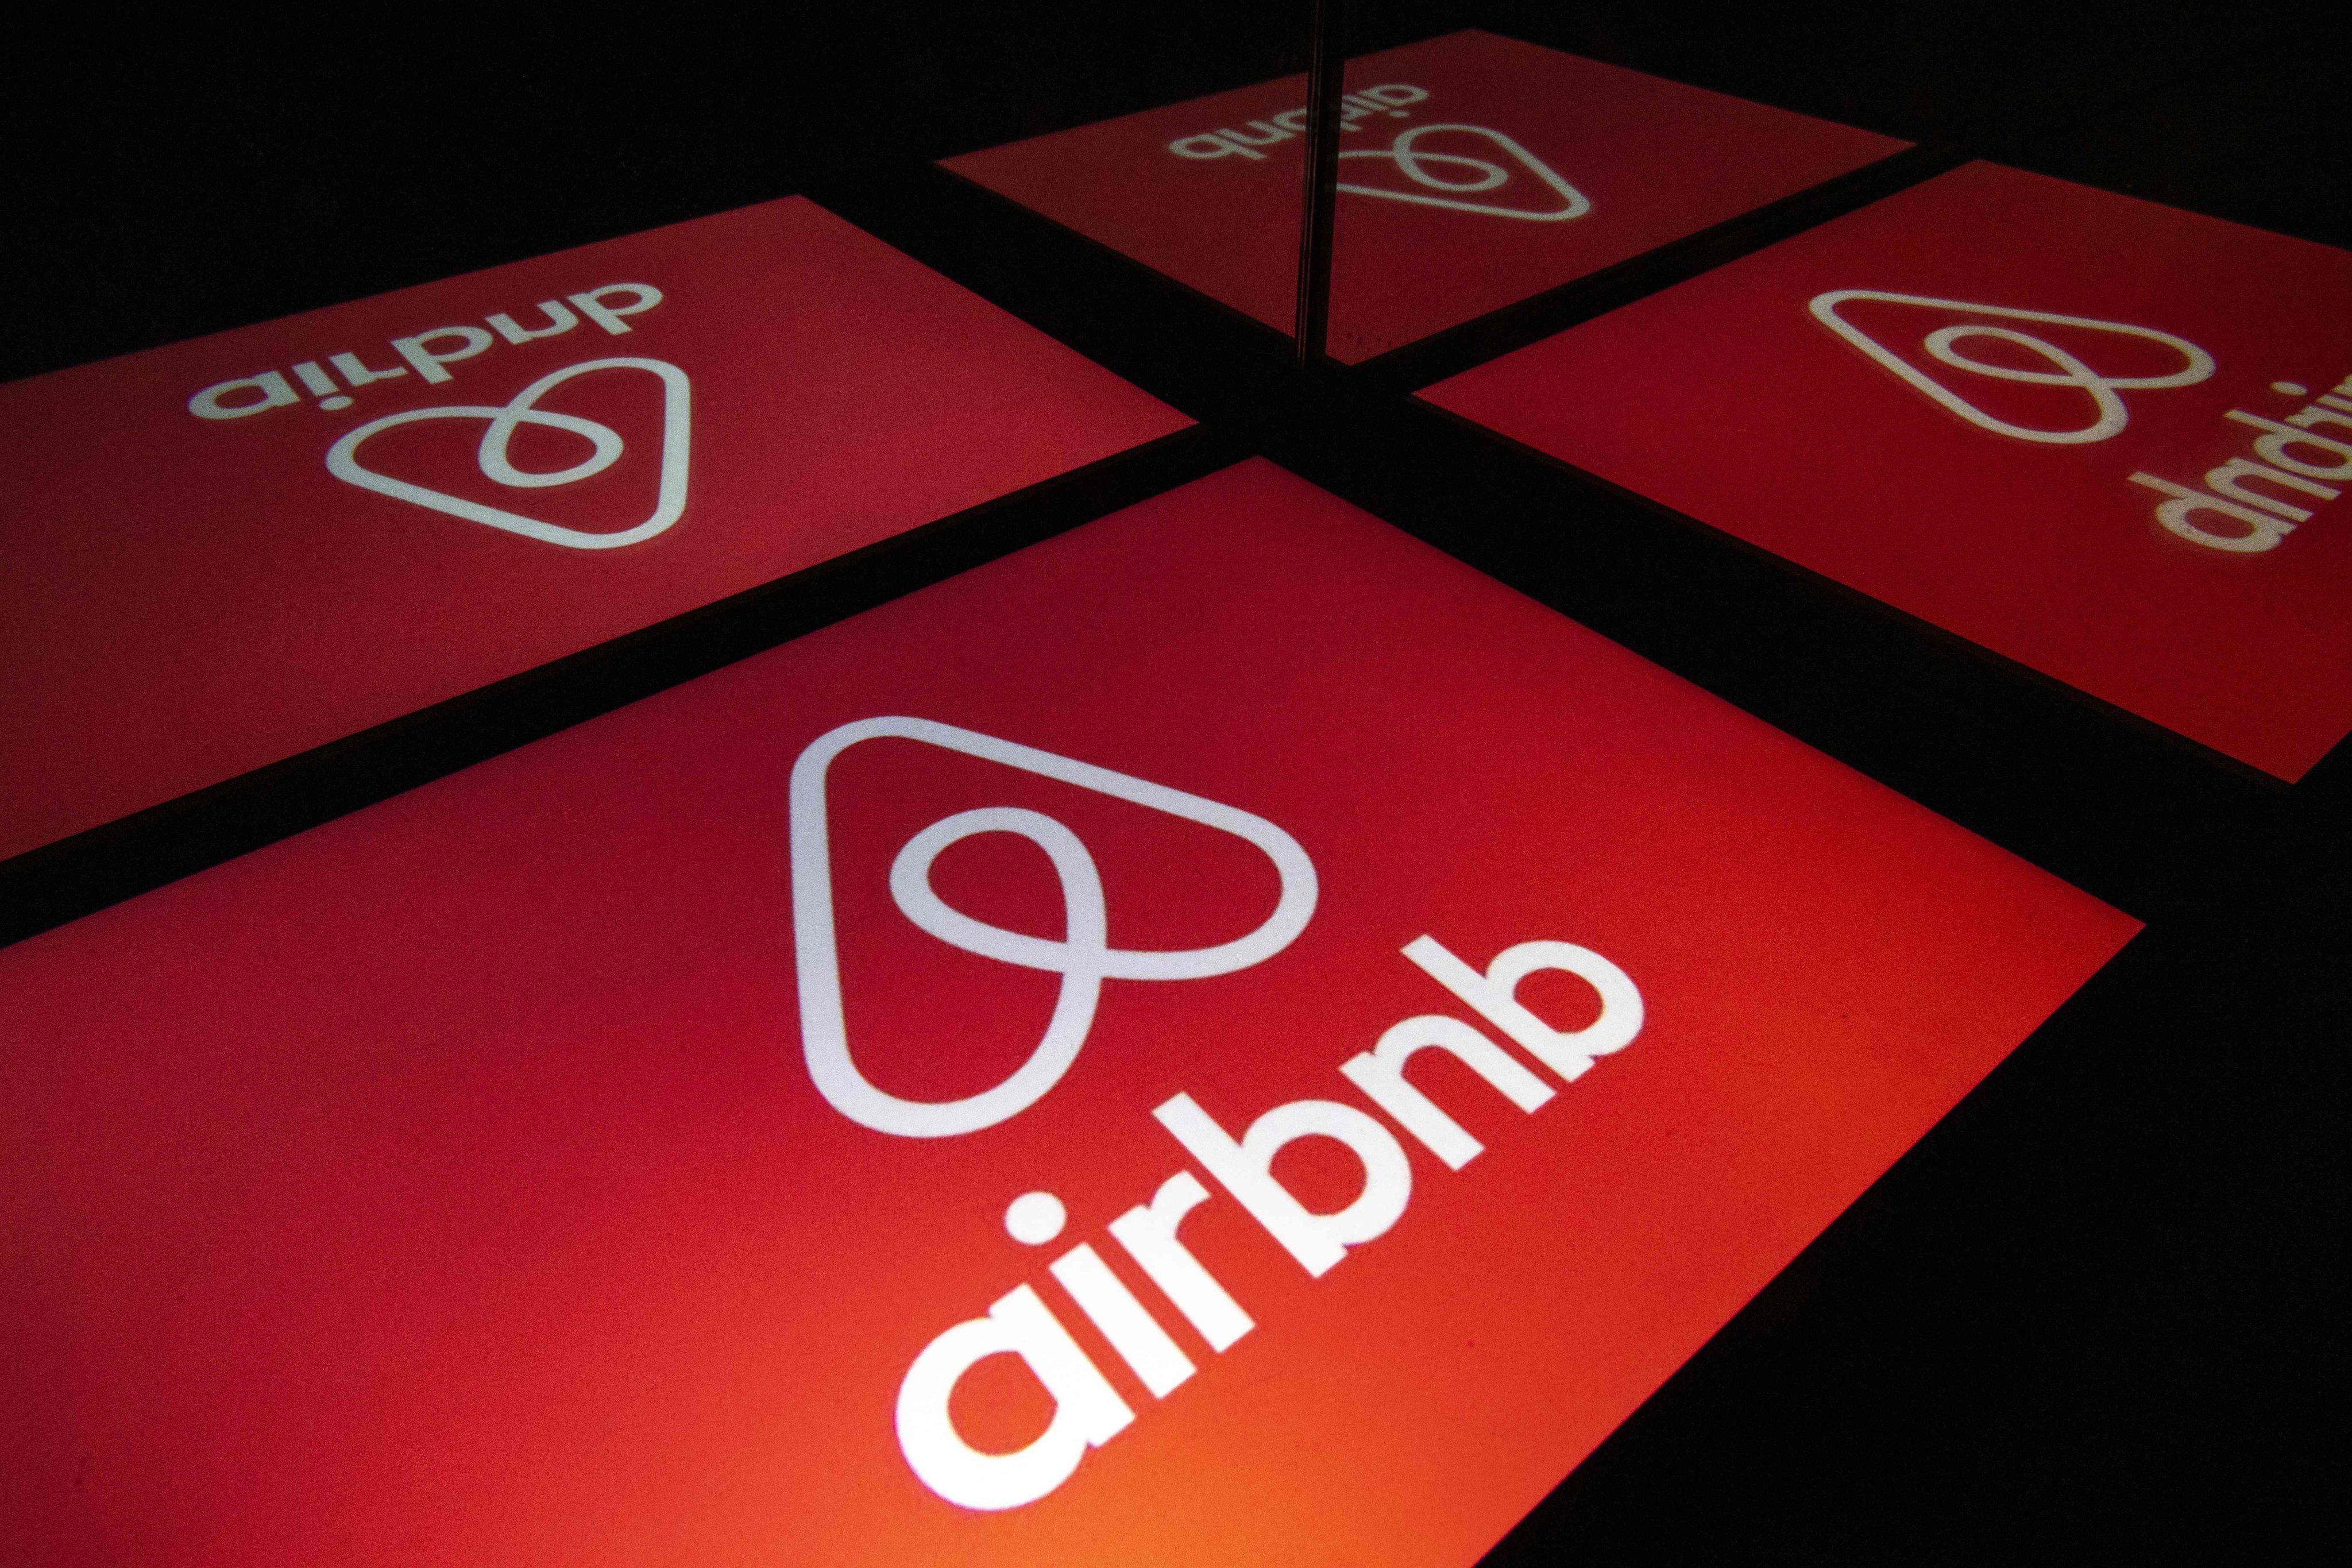 The logo of the online lodging service Airbnb. Photo: AFP